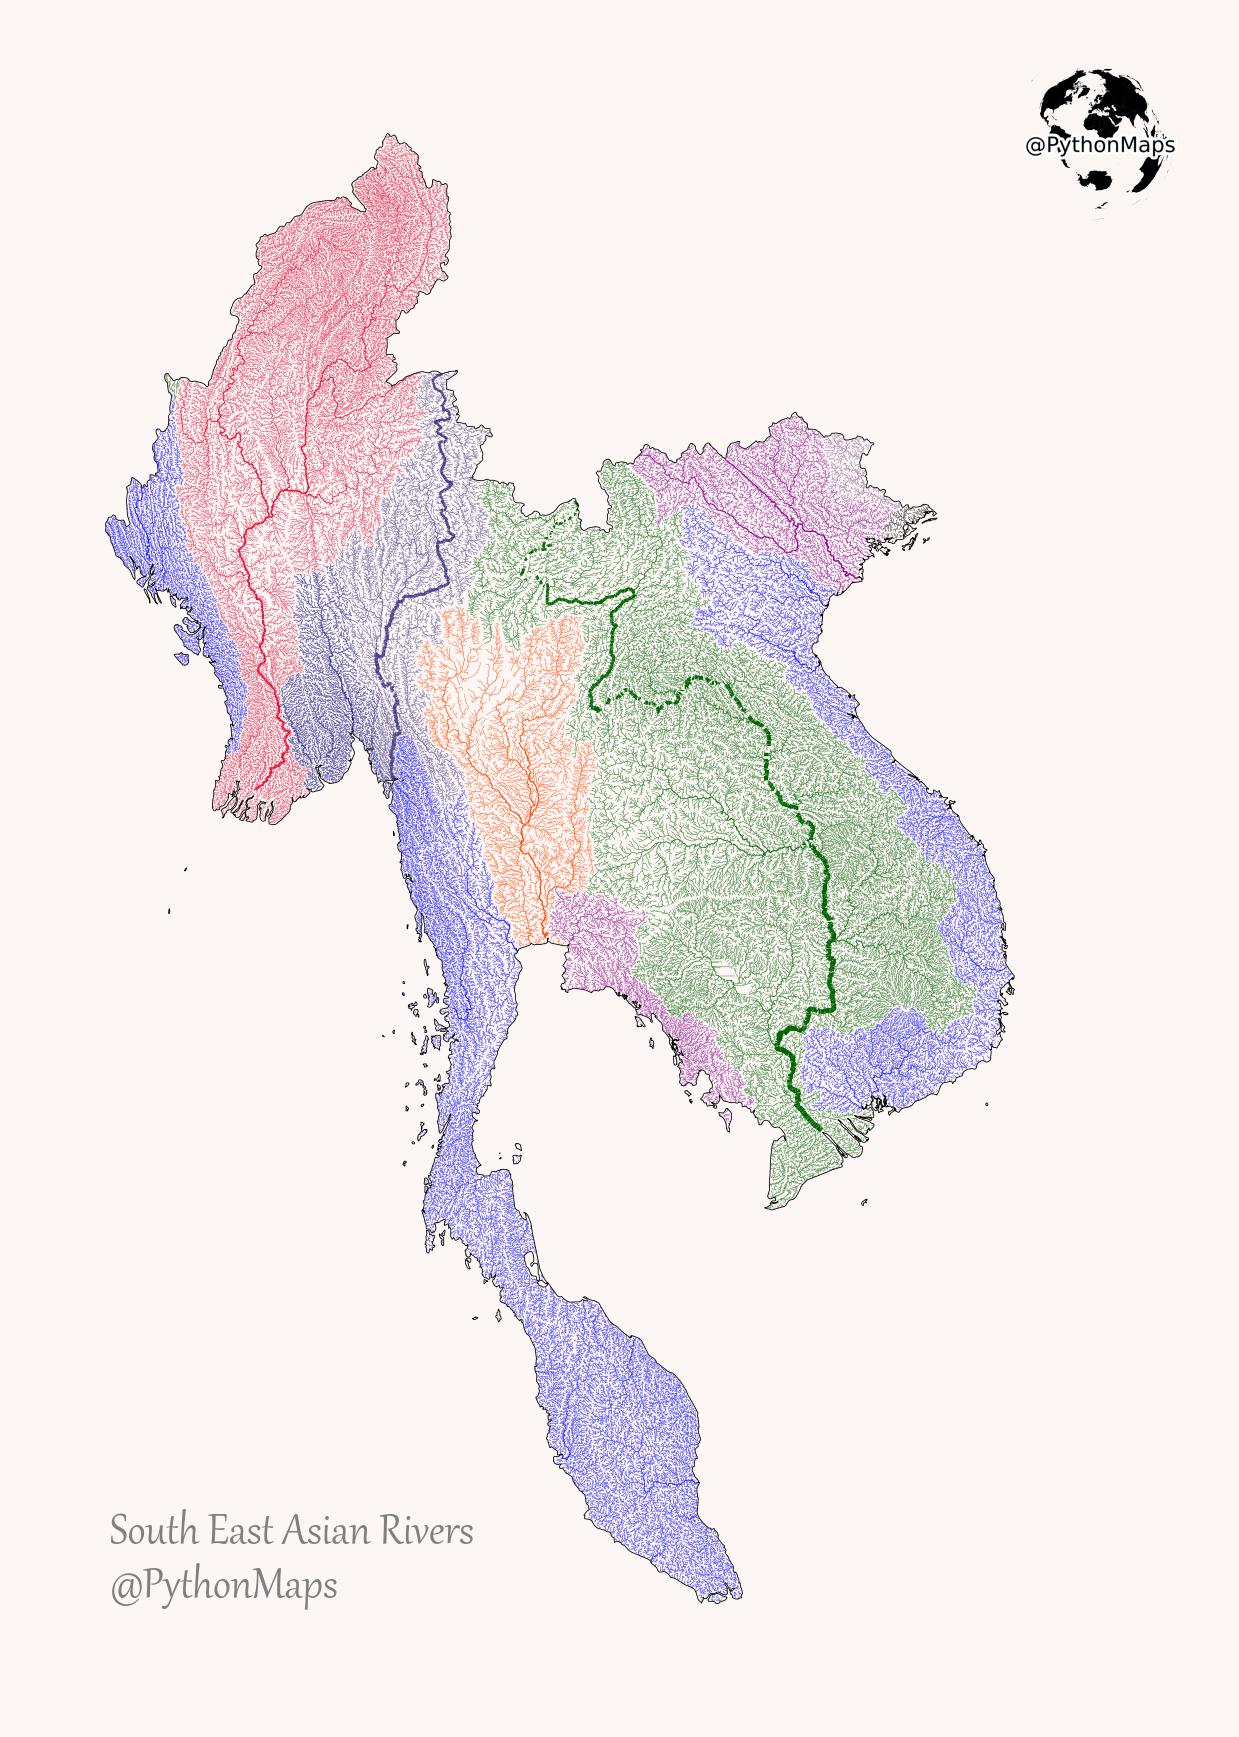 The Rivers of South East Asia